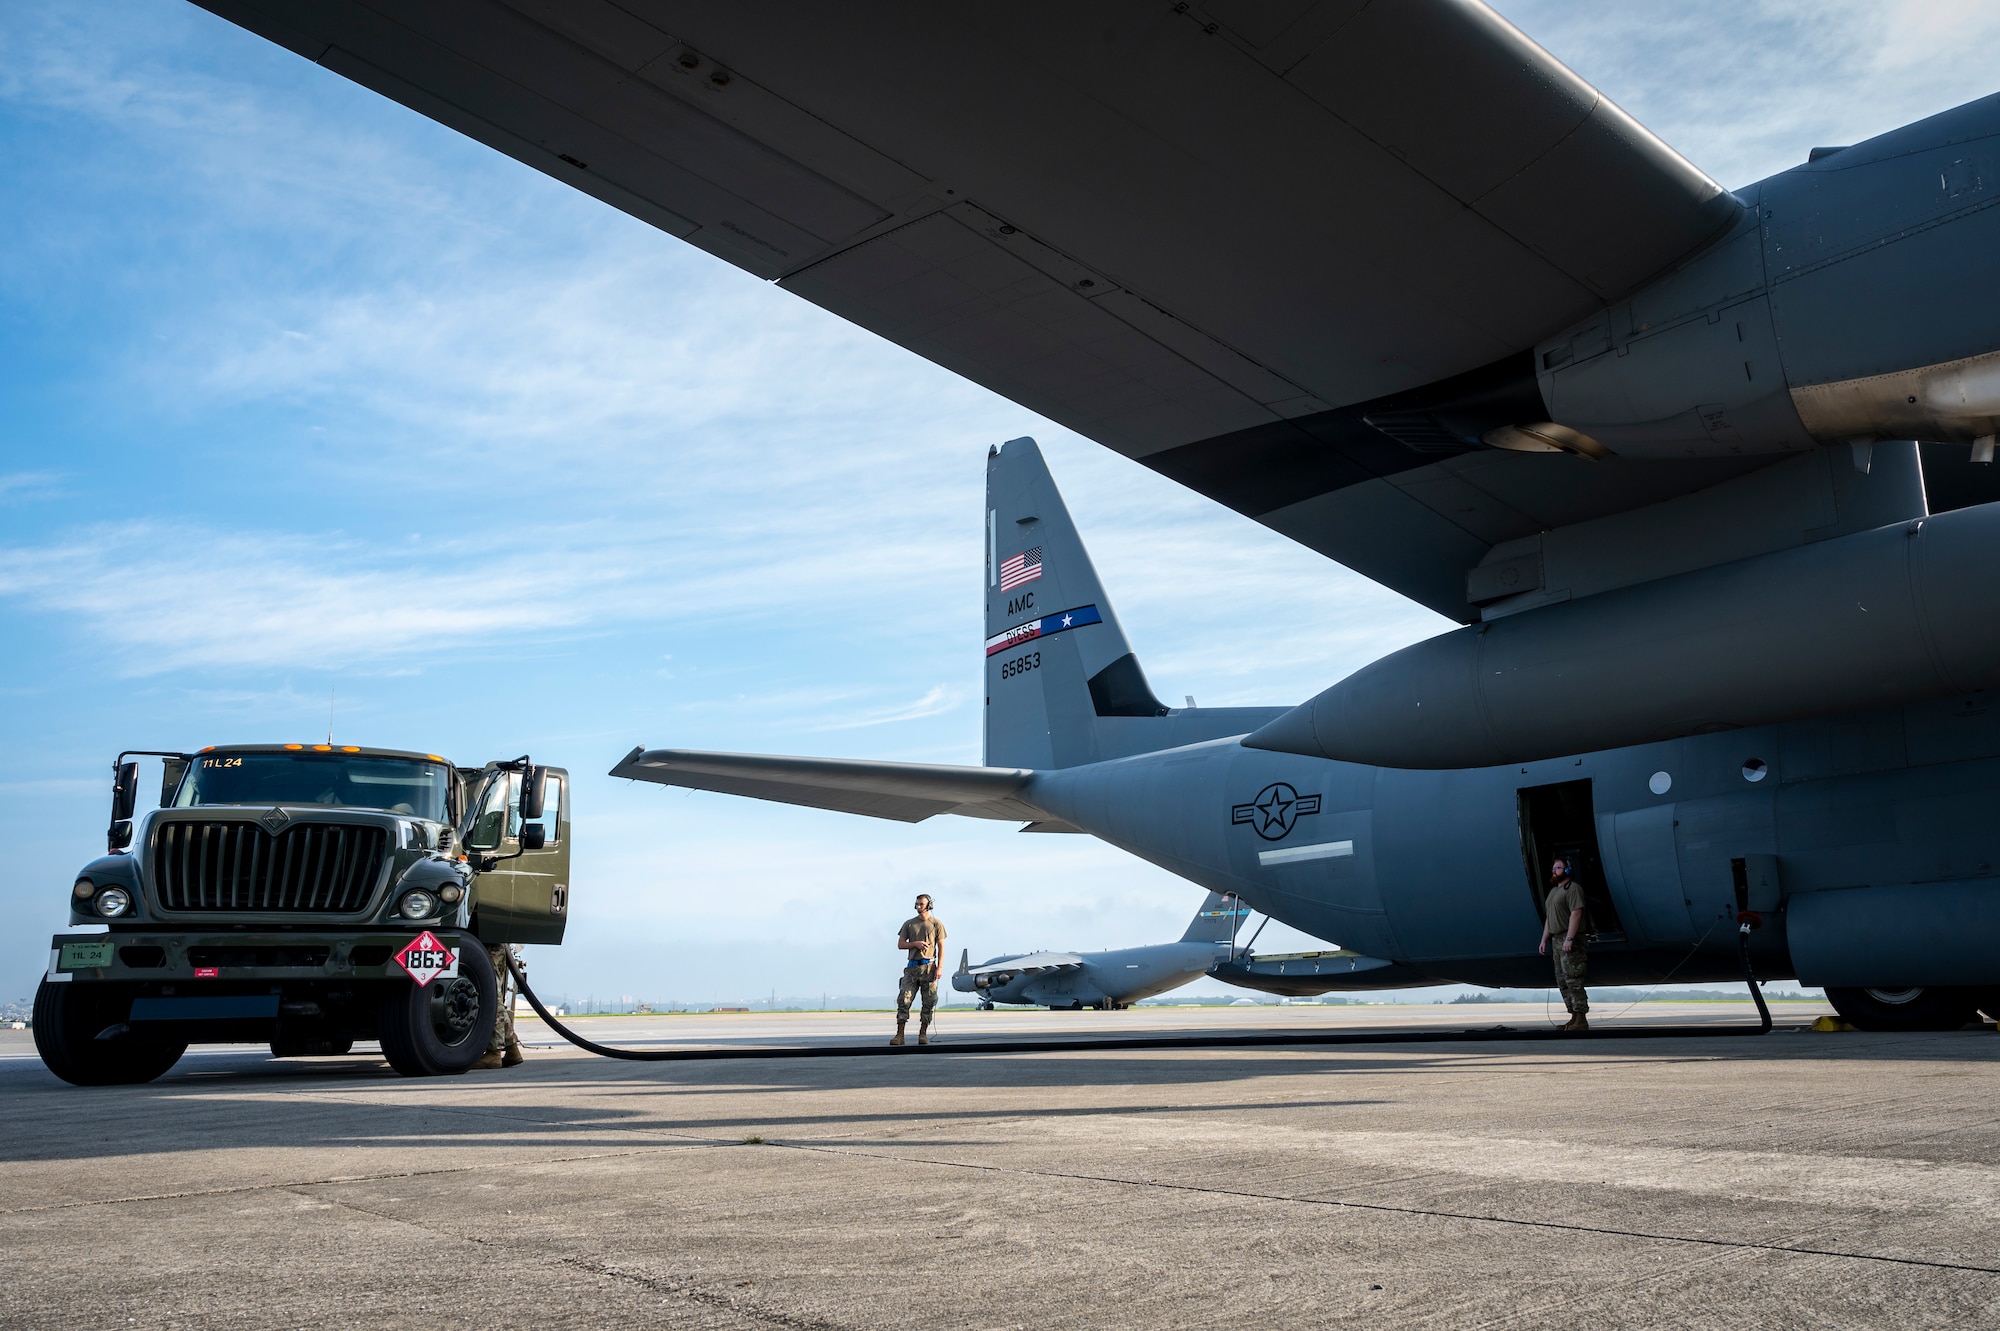 Air Force members from the 18th Logistics Readiness Squadron provide fuel to a C-130J Hercules before takeoff .